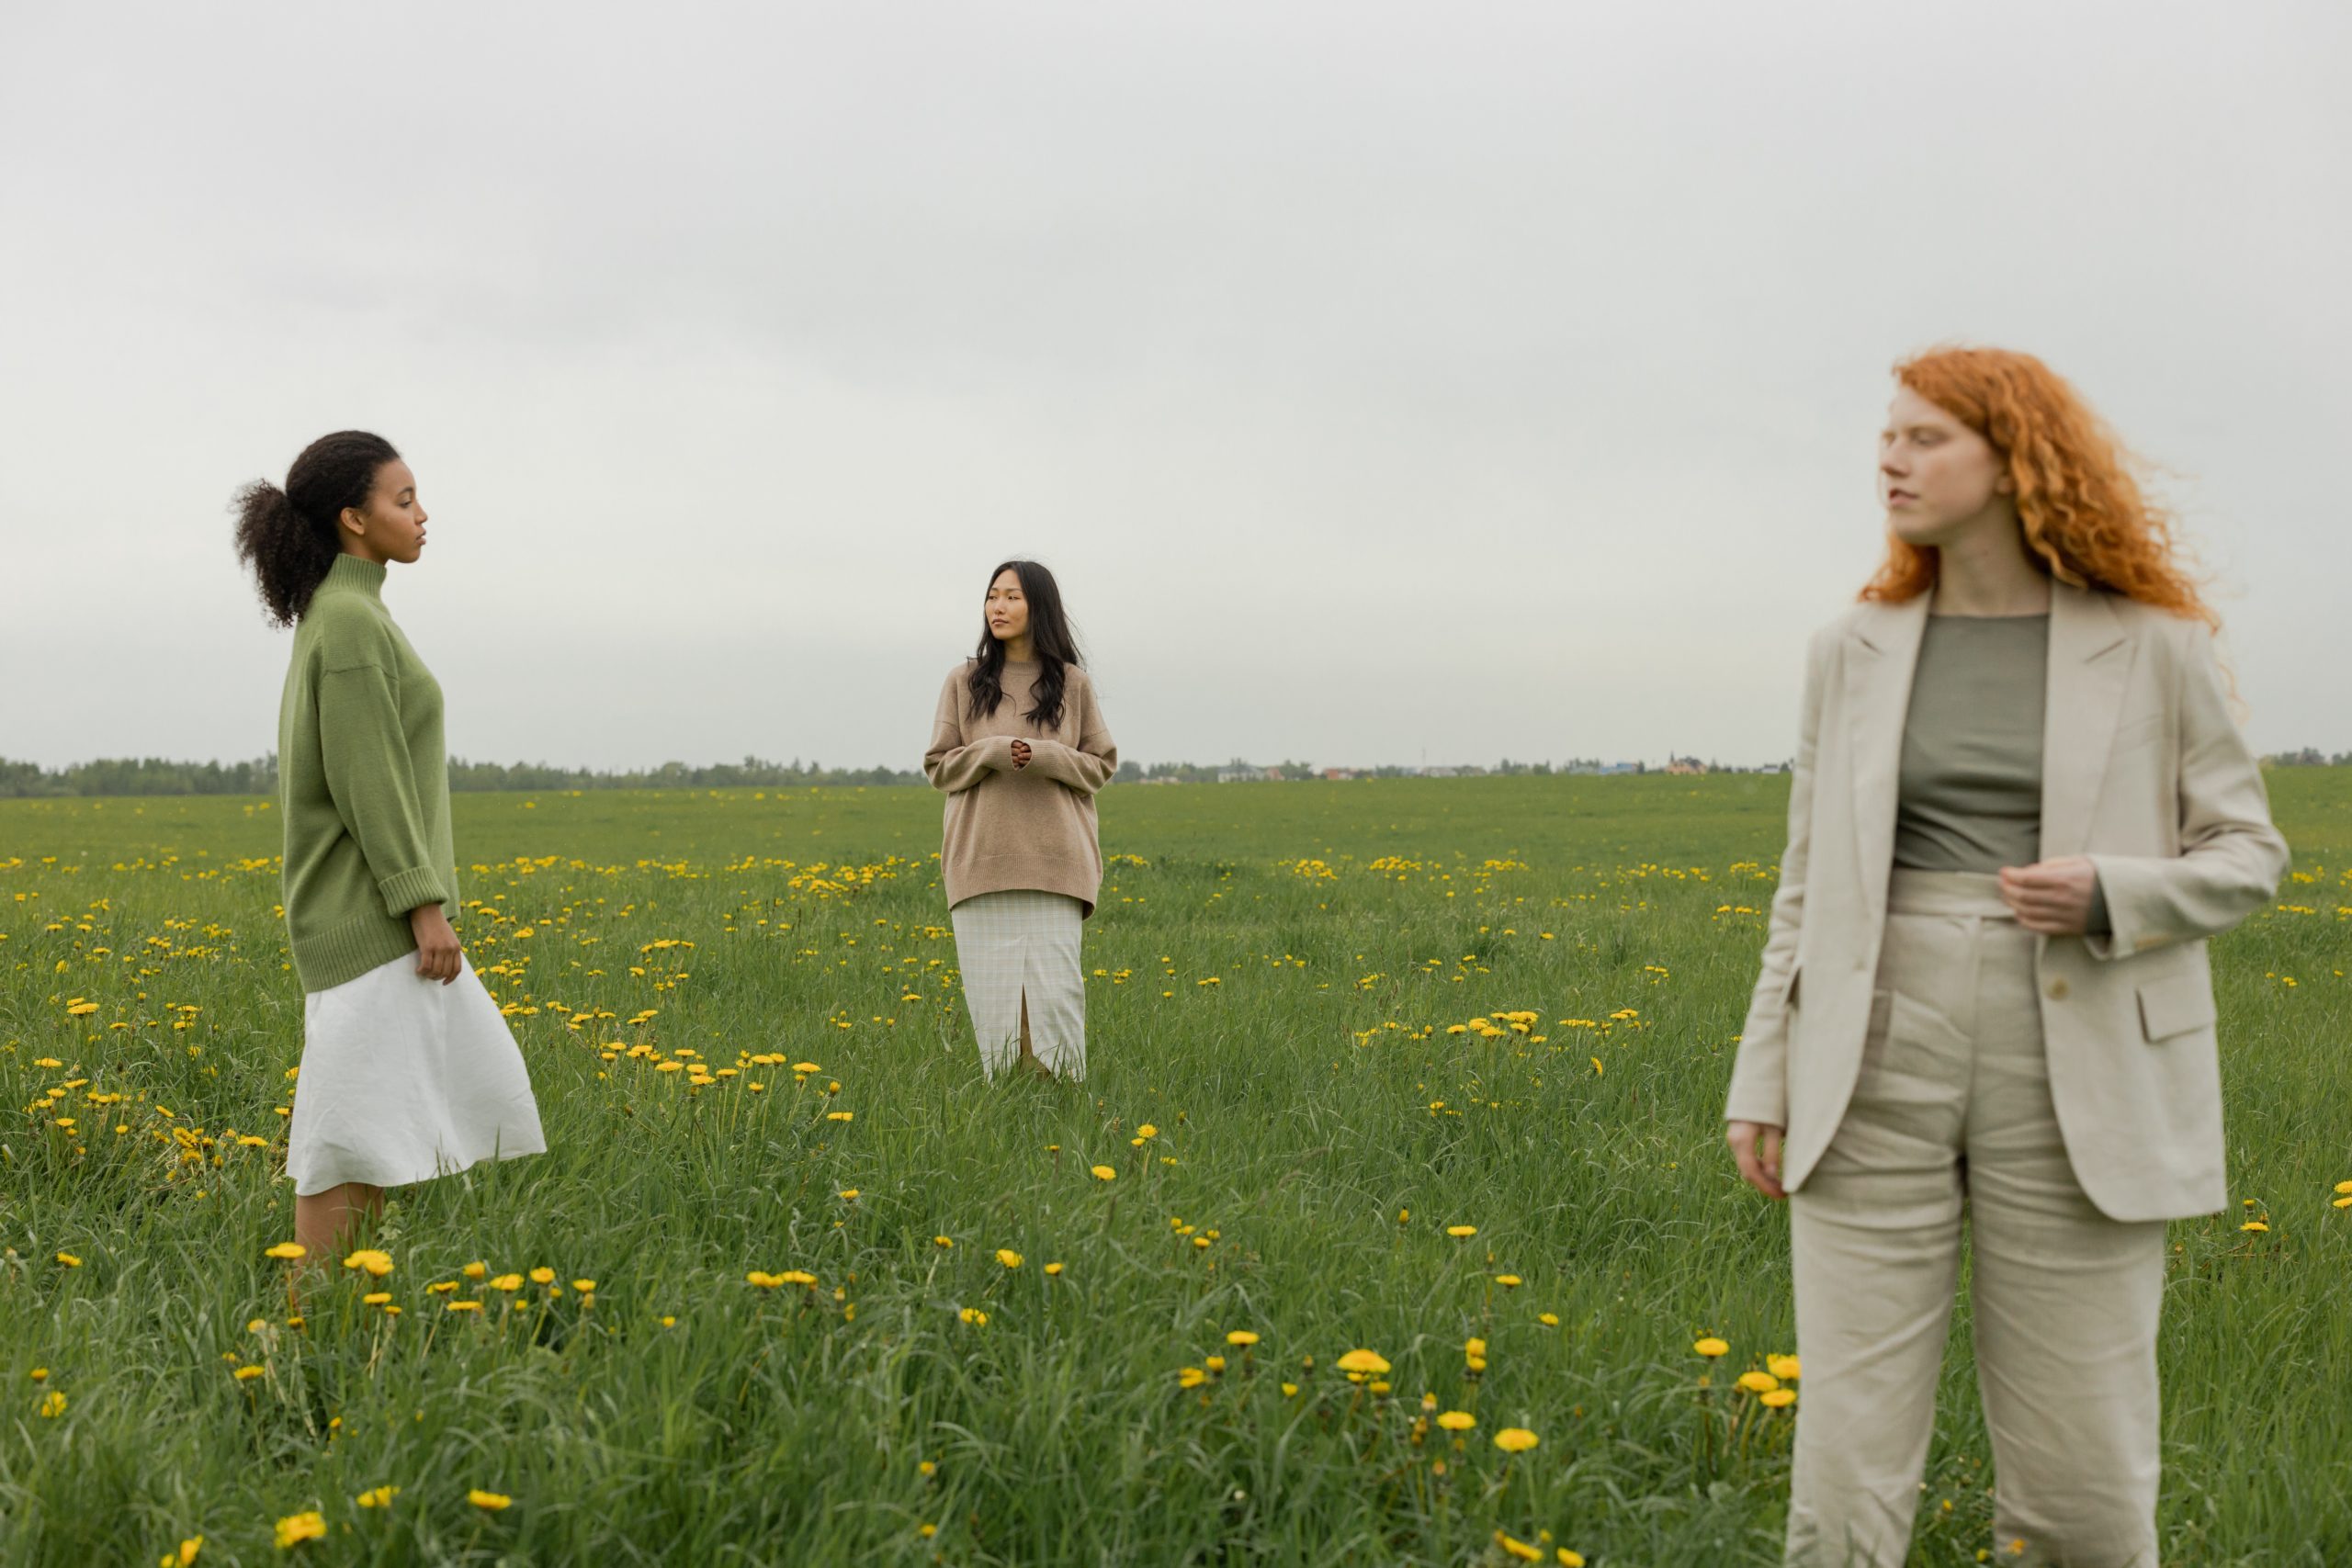 Three diverse women are standing apart from each other on some grass.